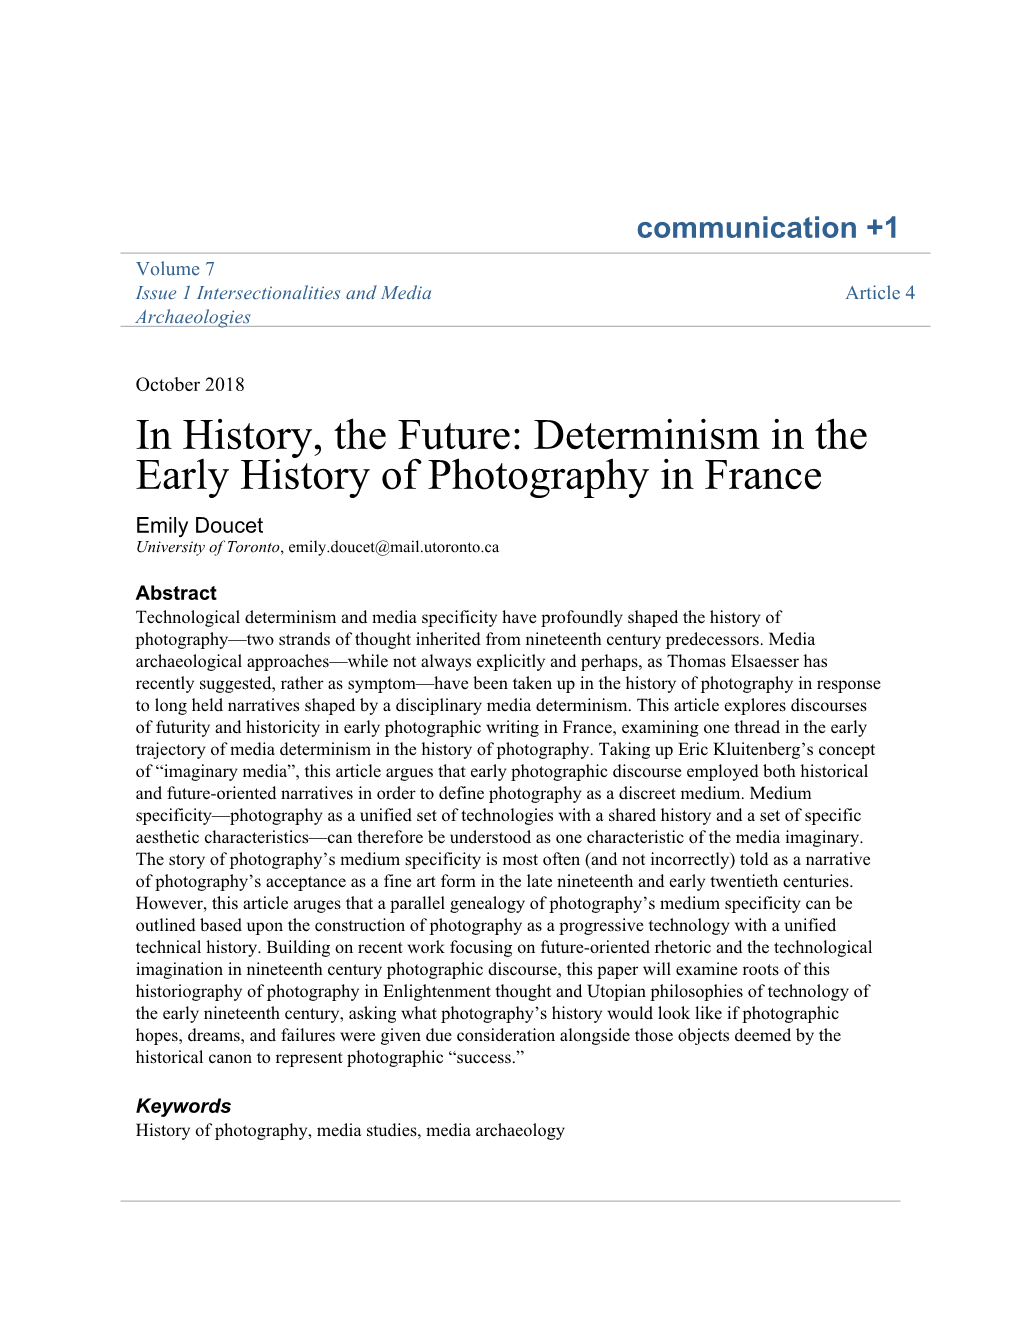 Determinism in the Early History of Photography in France Emily Doucet University of Toronto, Emily.Doucet@Mail.Utoronto.Ca